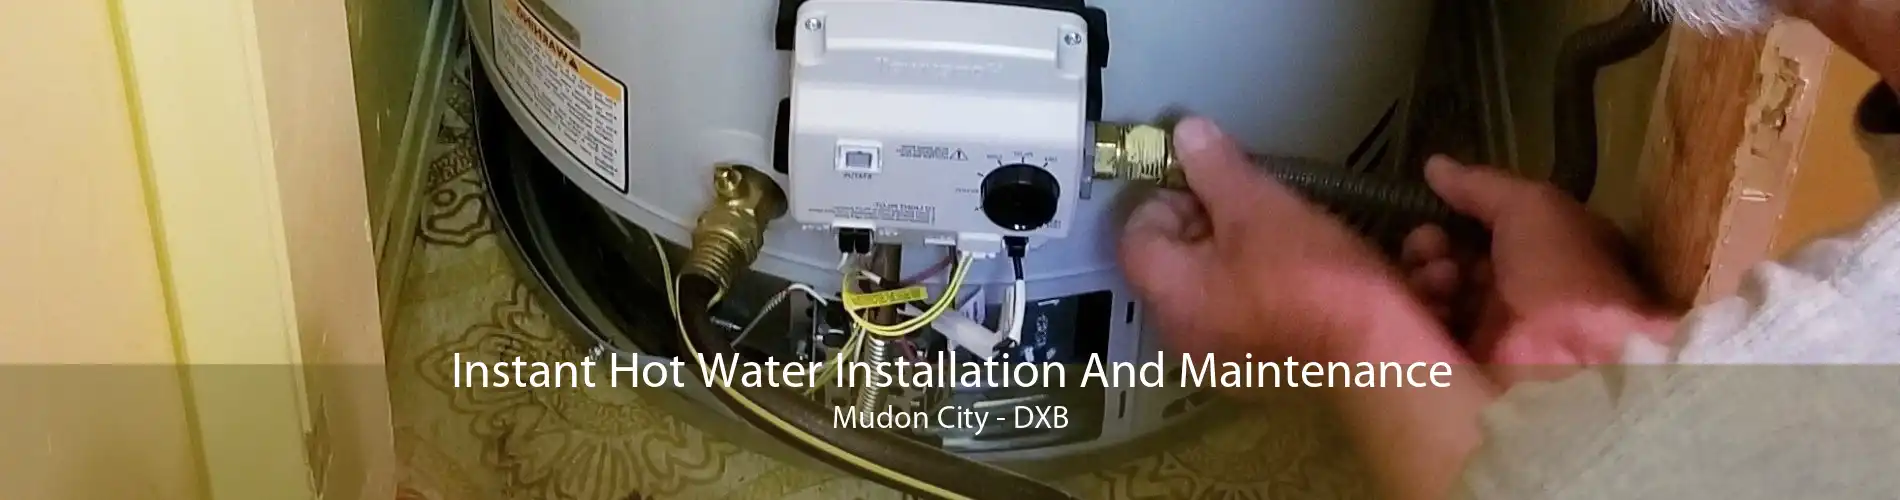 Instant Hot Water Installation And Maintenance Mudon City - DXB